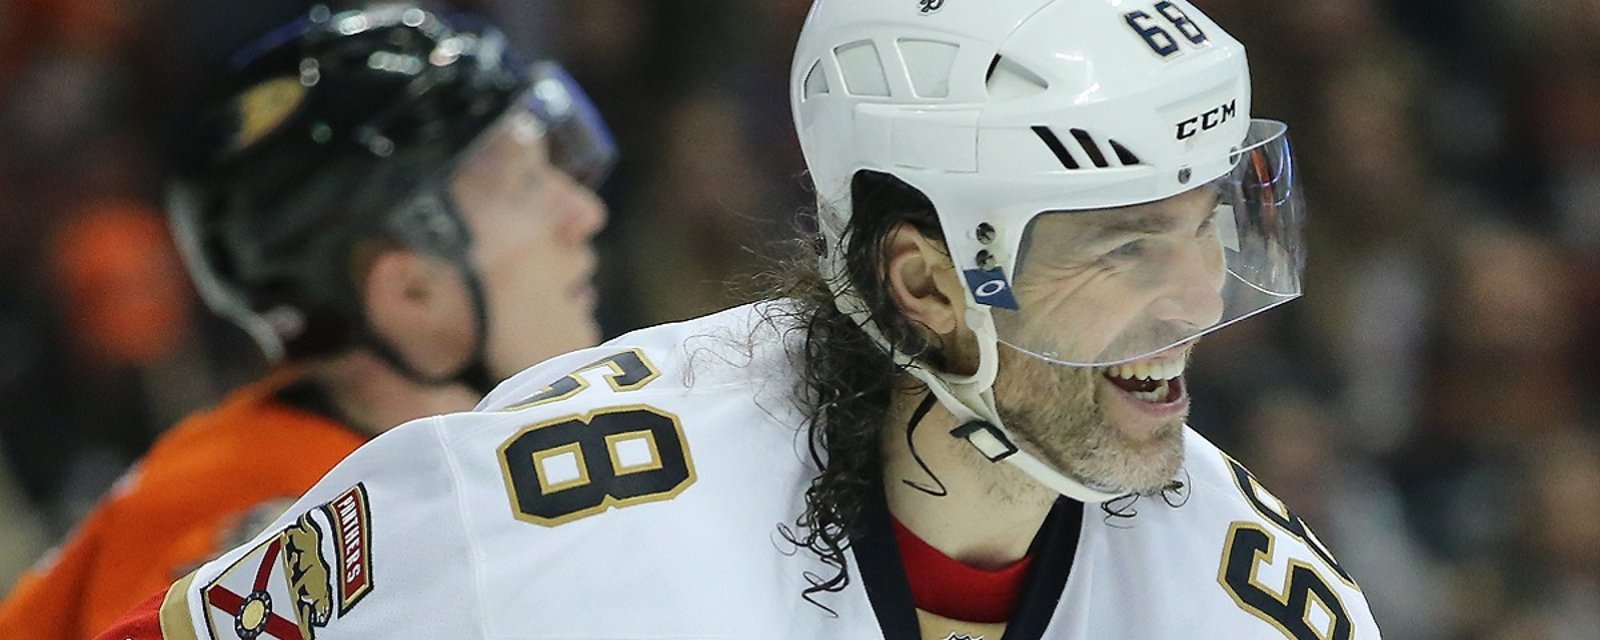 Jaromir Jagr makes a statement about his future in the NHL.